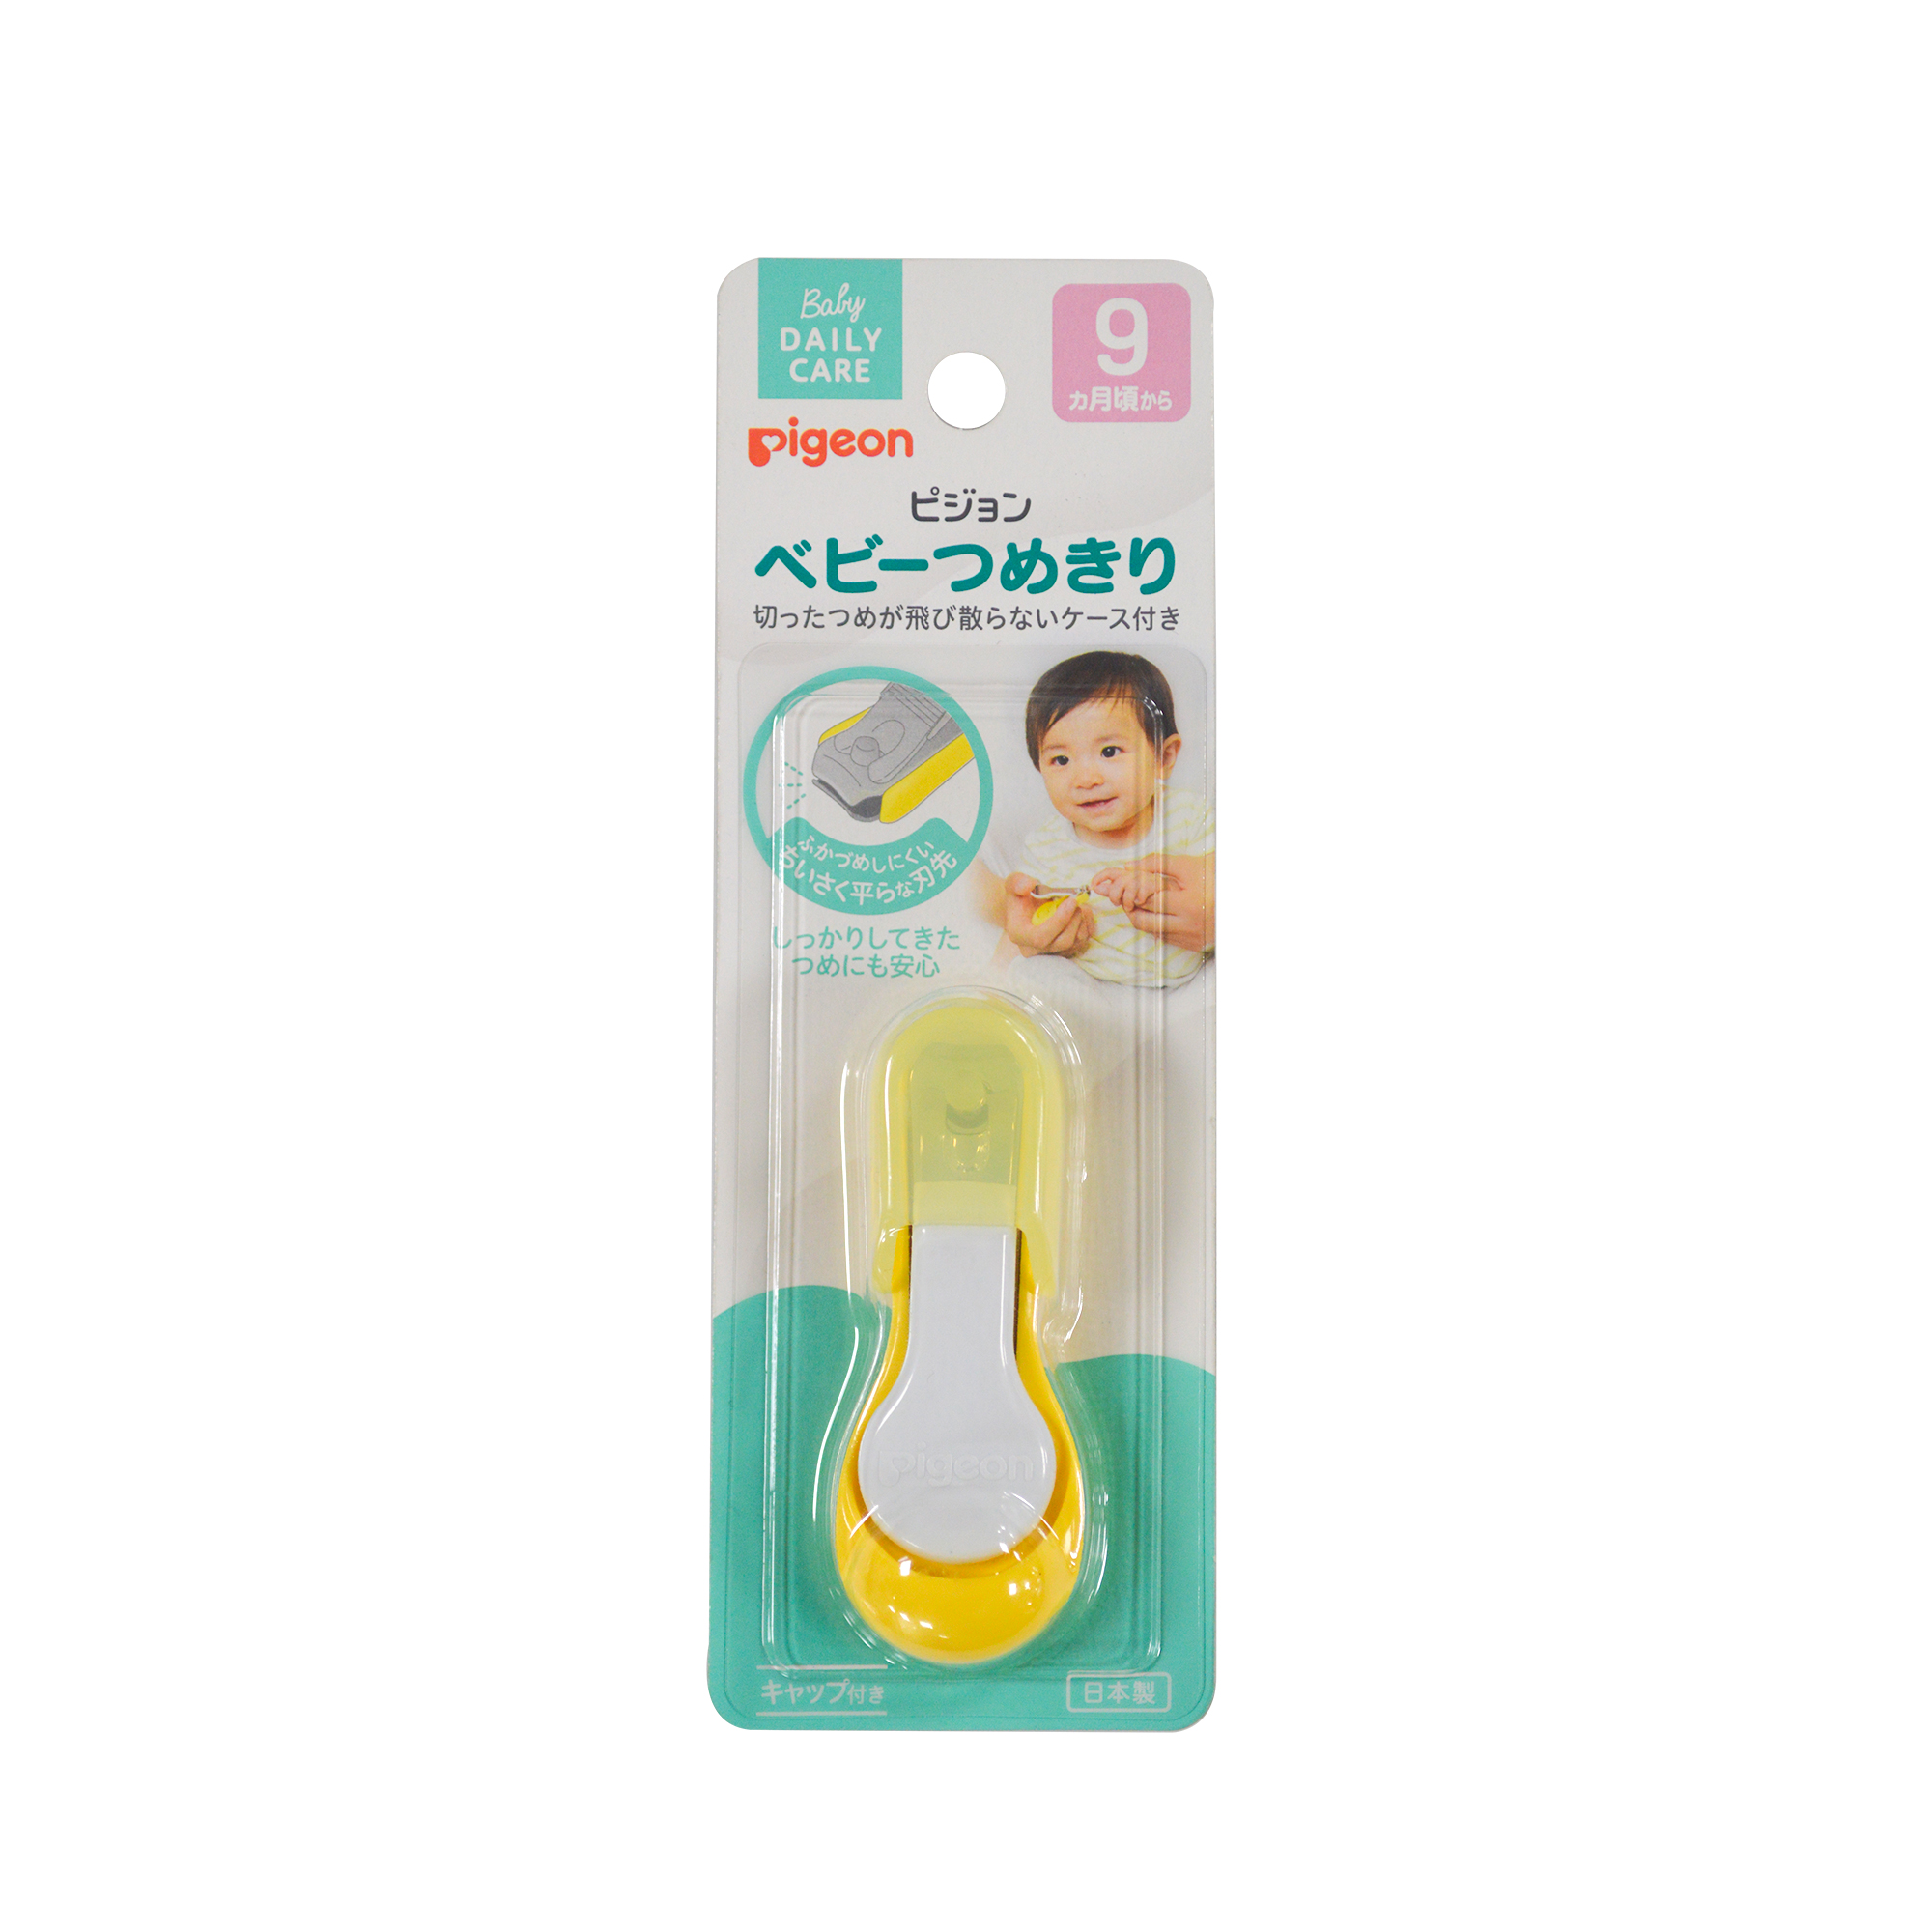 Pigeon Baby Safety Nail Clippers (9+ Months) – Japanese Taste